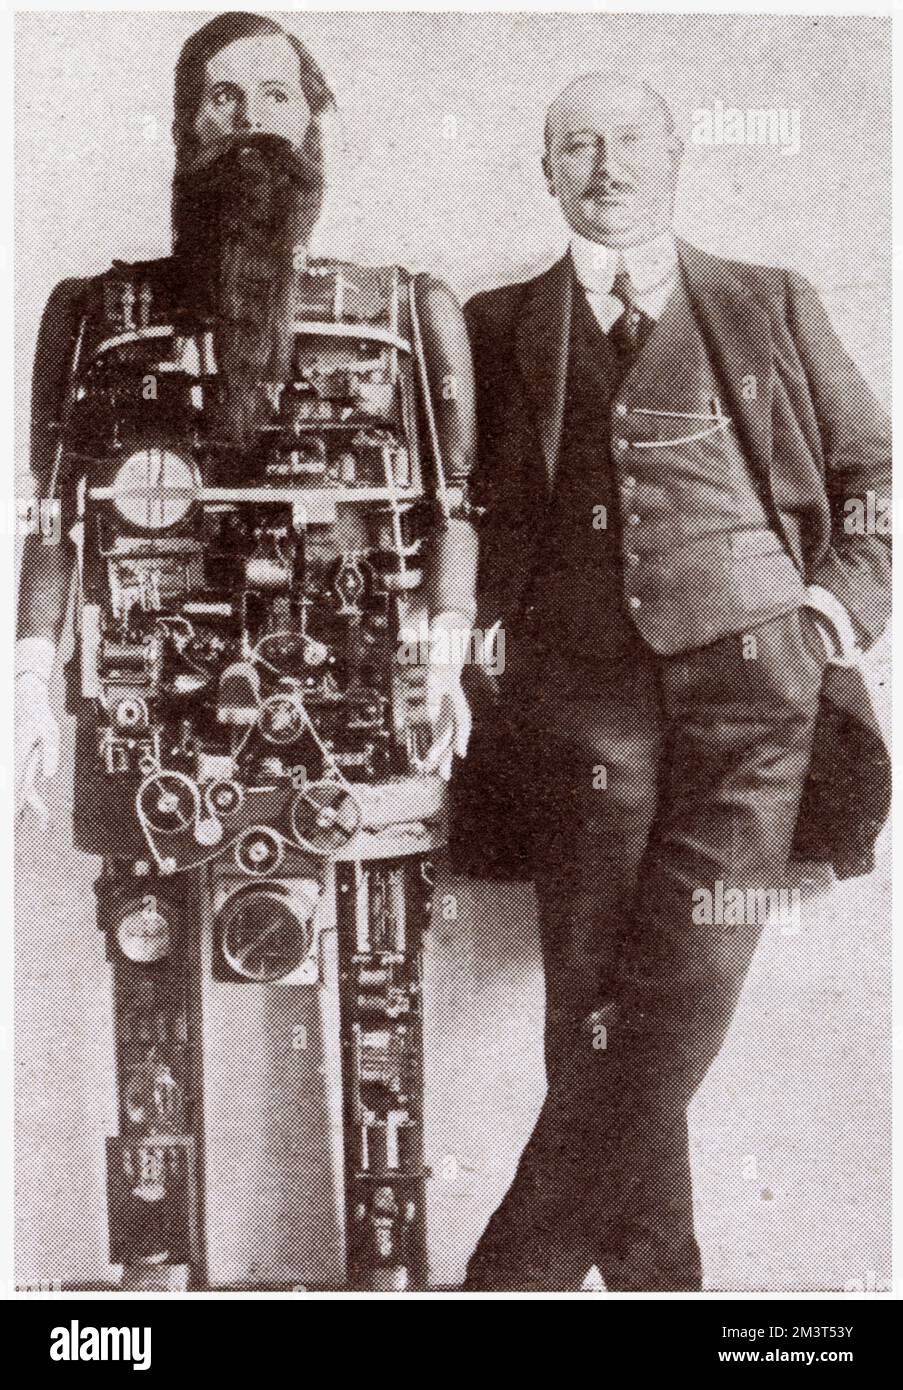 Berlin inventor Herr Widmann with his mechanical clockwork man that imitates the human movements, it could sing, laugh and whistle. Stock Photo